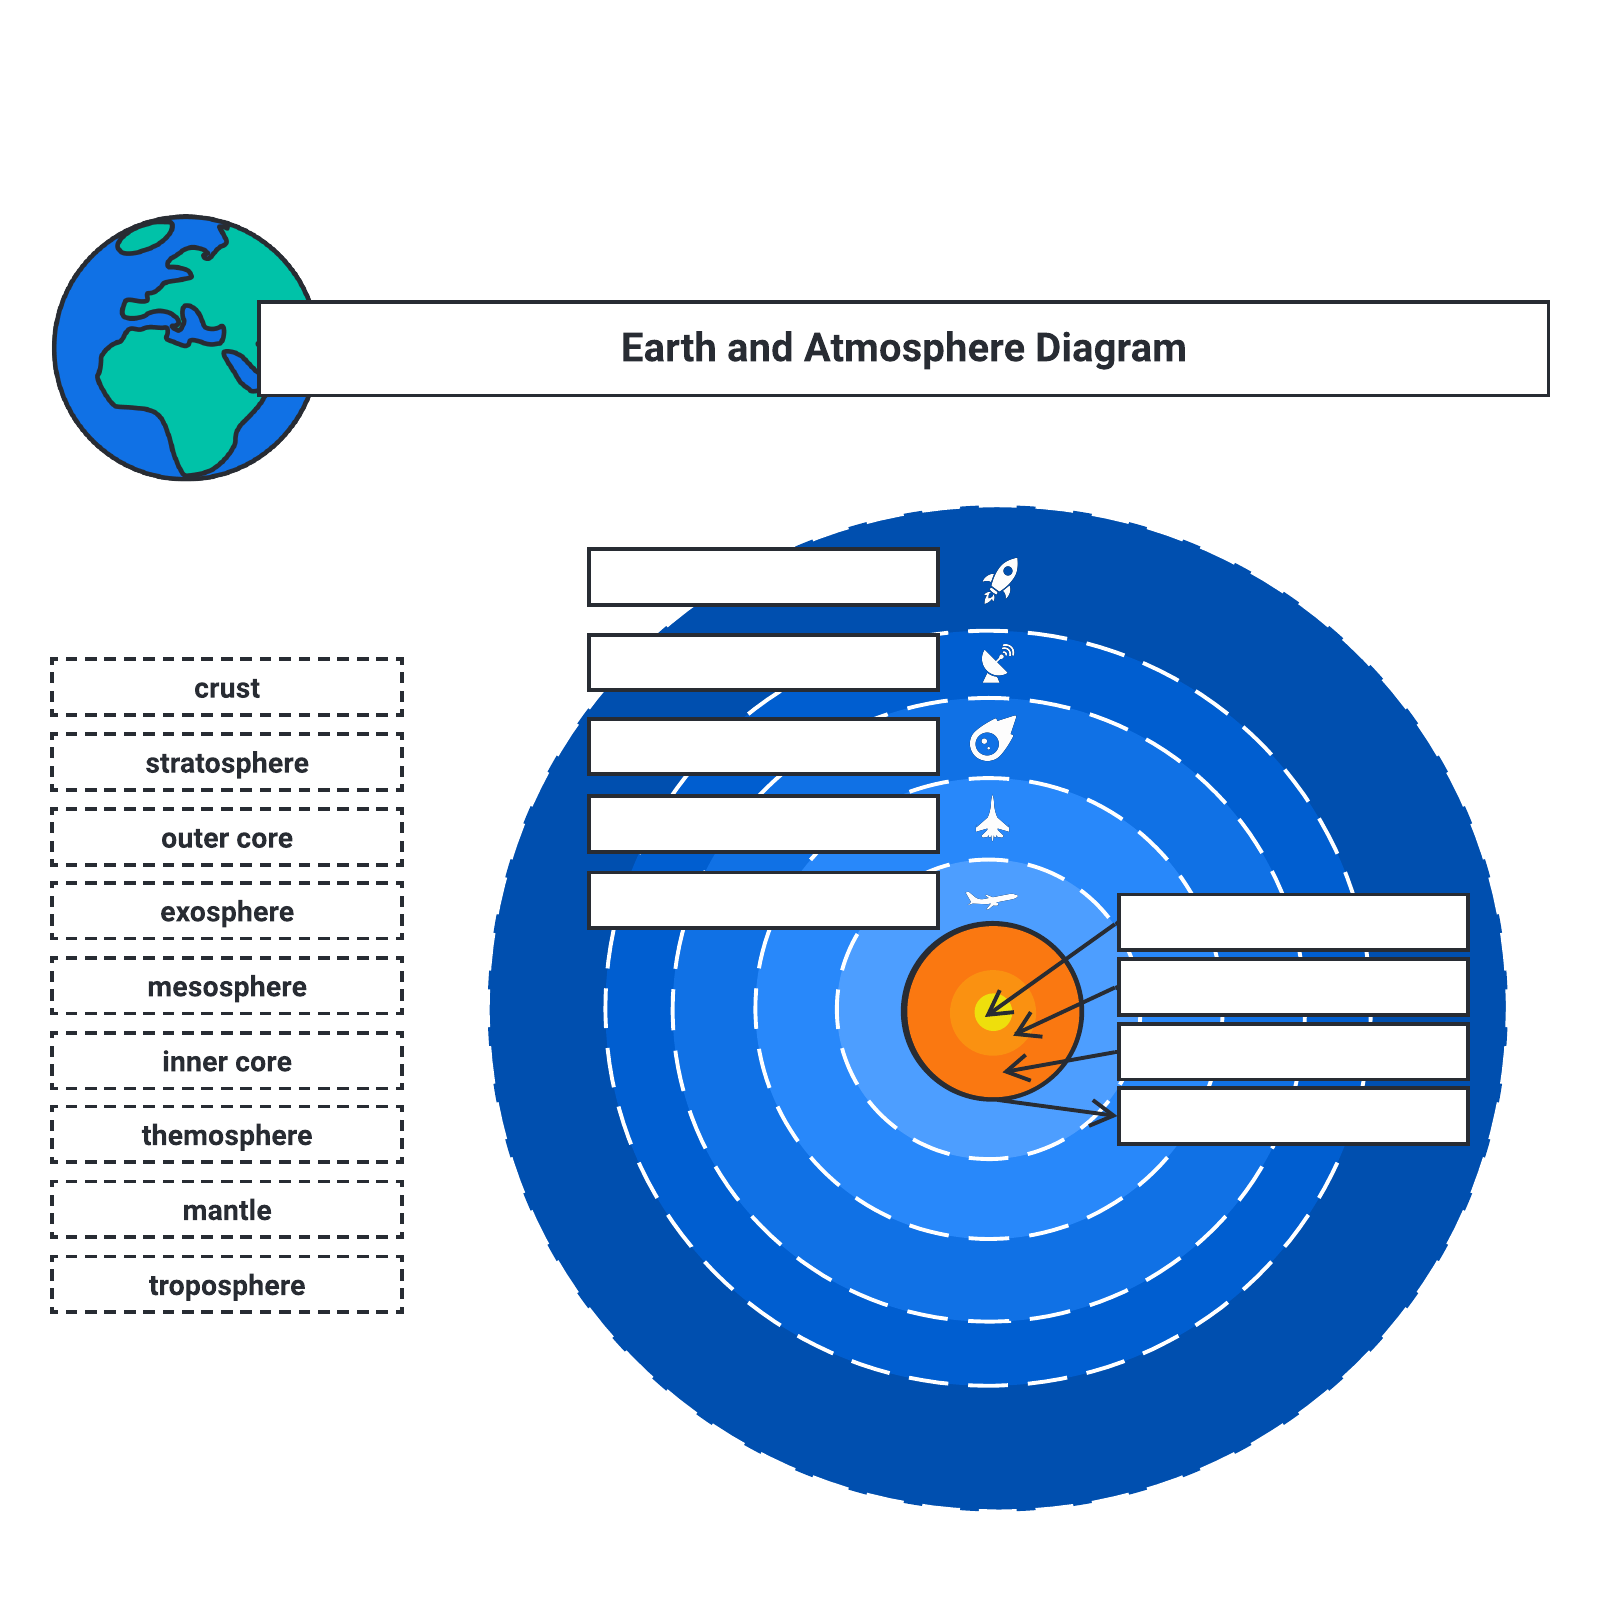 Earth and atmosphere diagram example